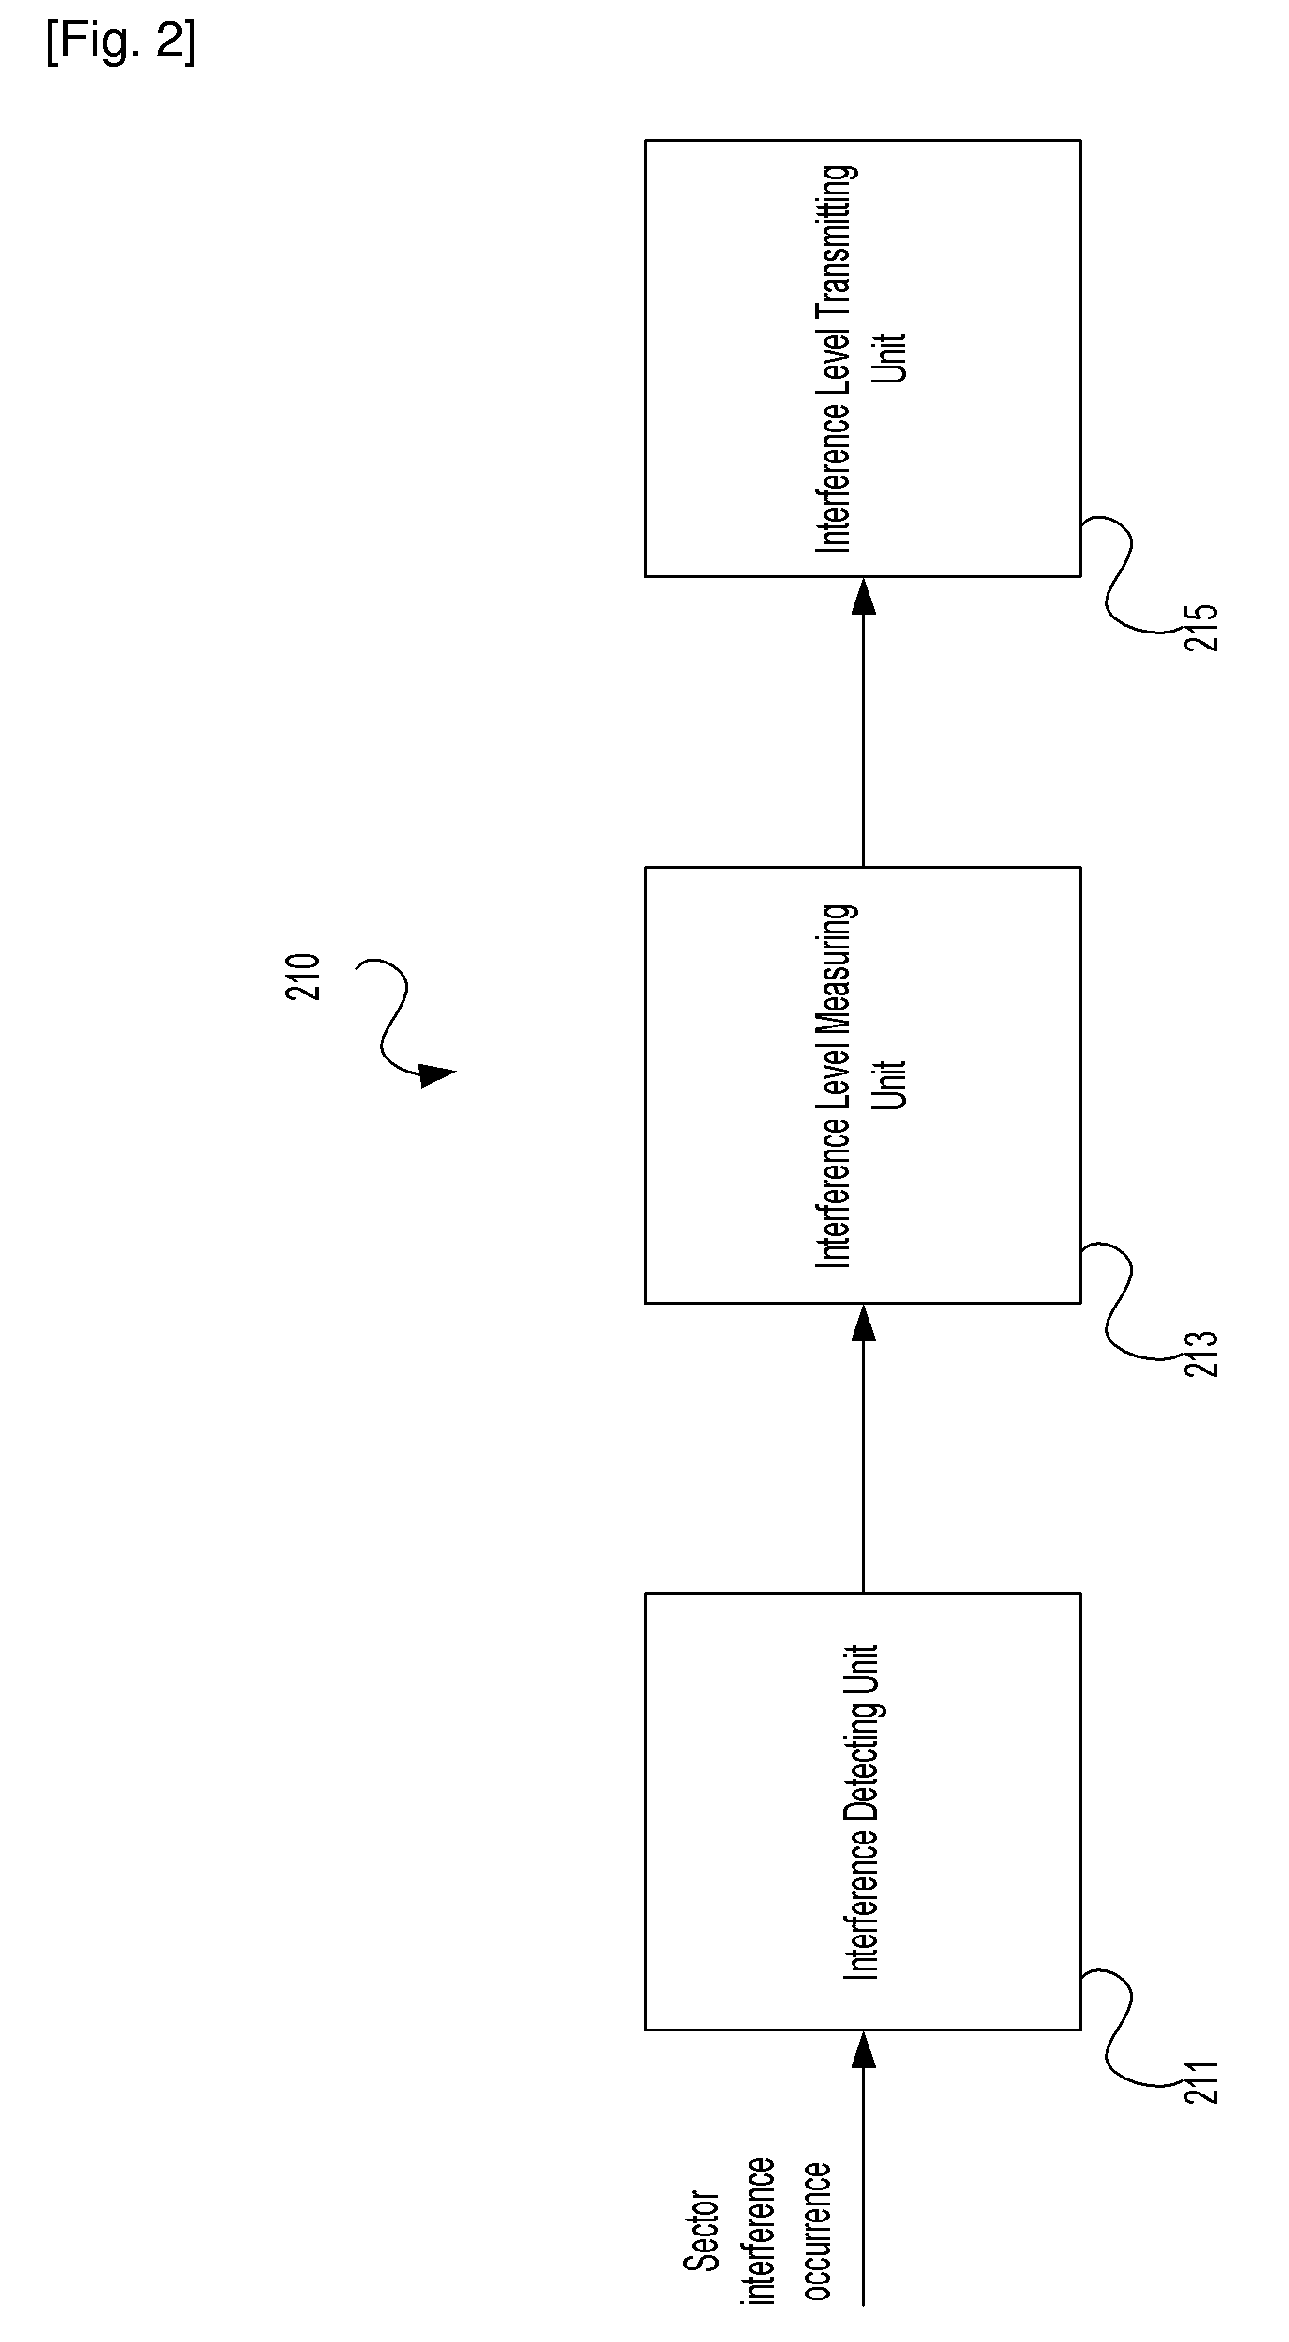 Power control and scheduling method in consideration of interference levels between neighbor sectors in communication system